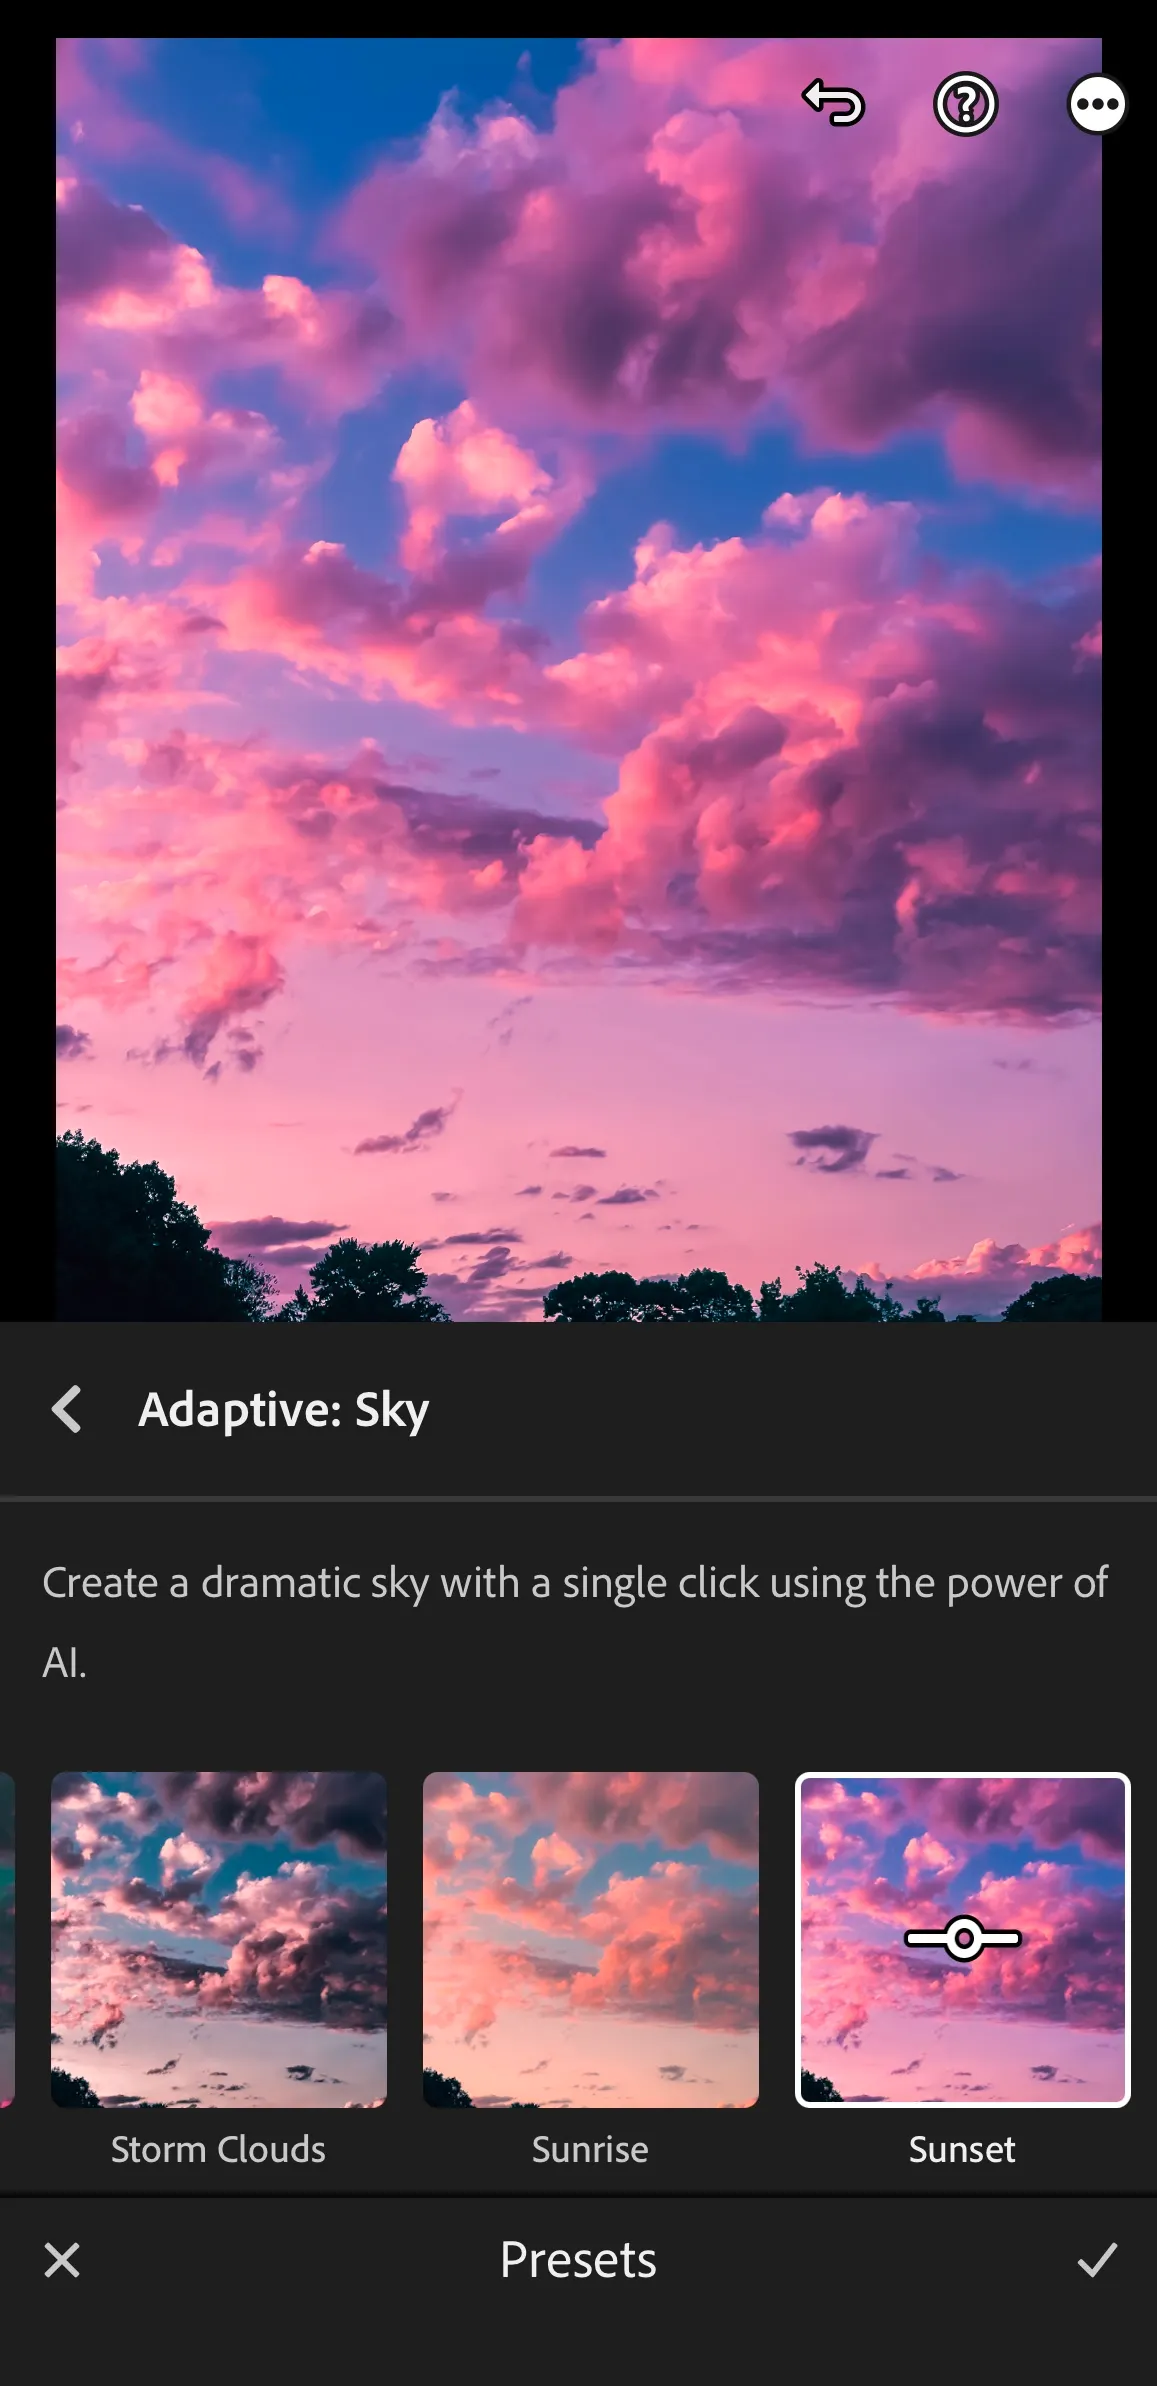 Enhance the sky with one-tap on Lightroom mobile.